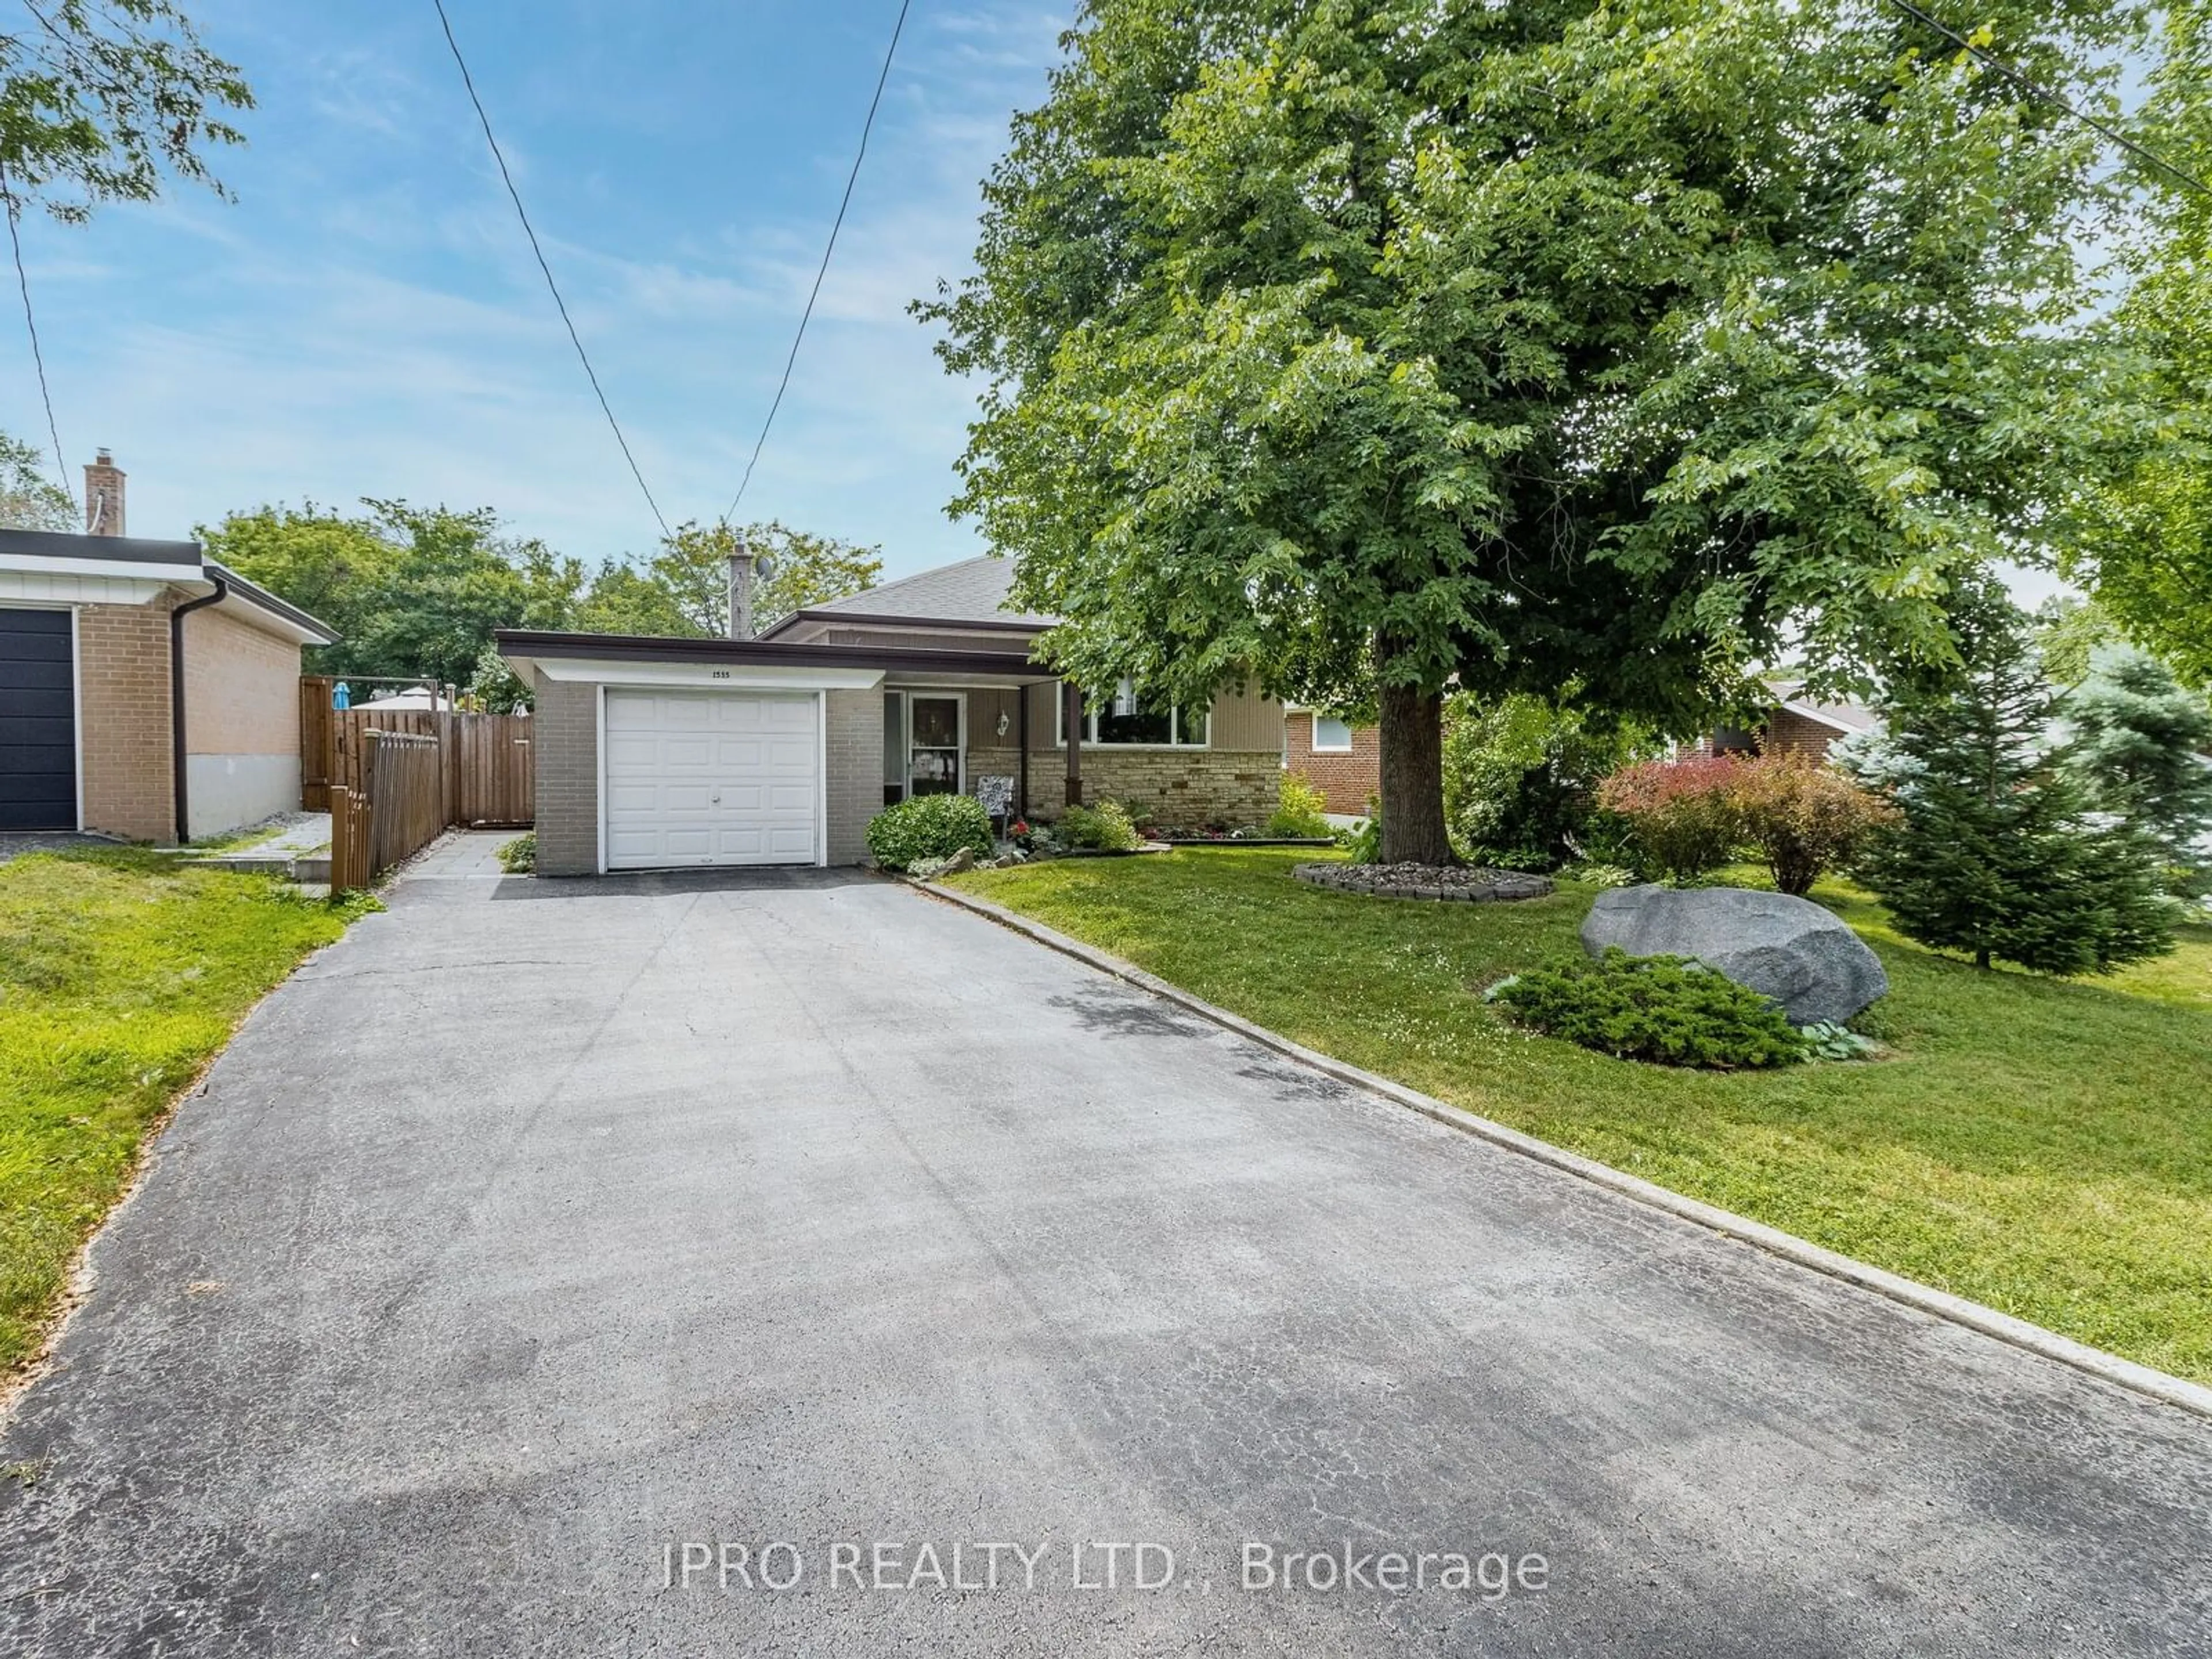 Frontside or backside of a home for 1535 Chalice Cres, Mississauga Ontario L5C 1S2